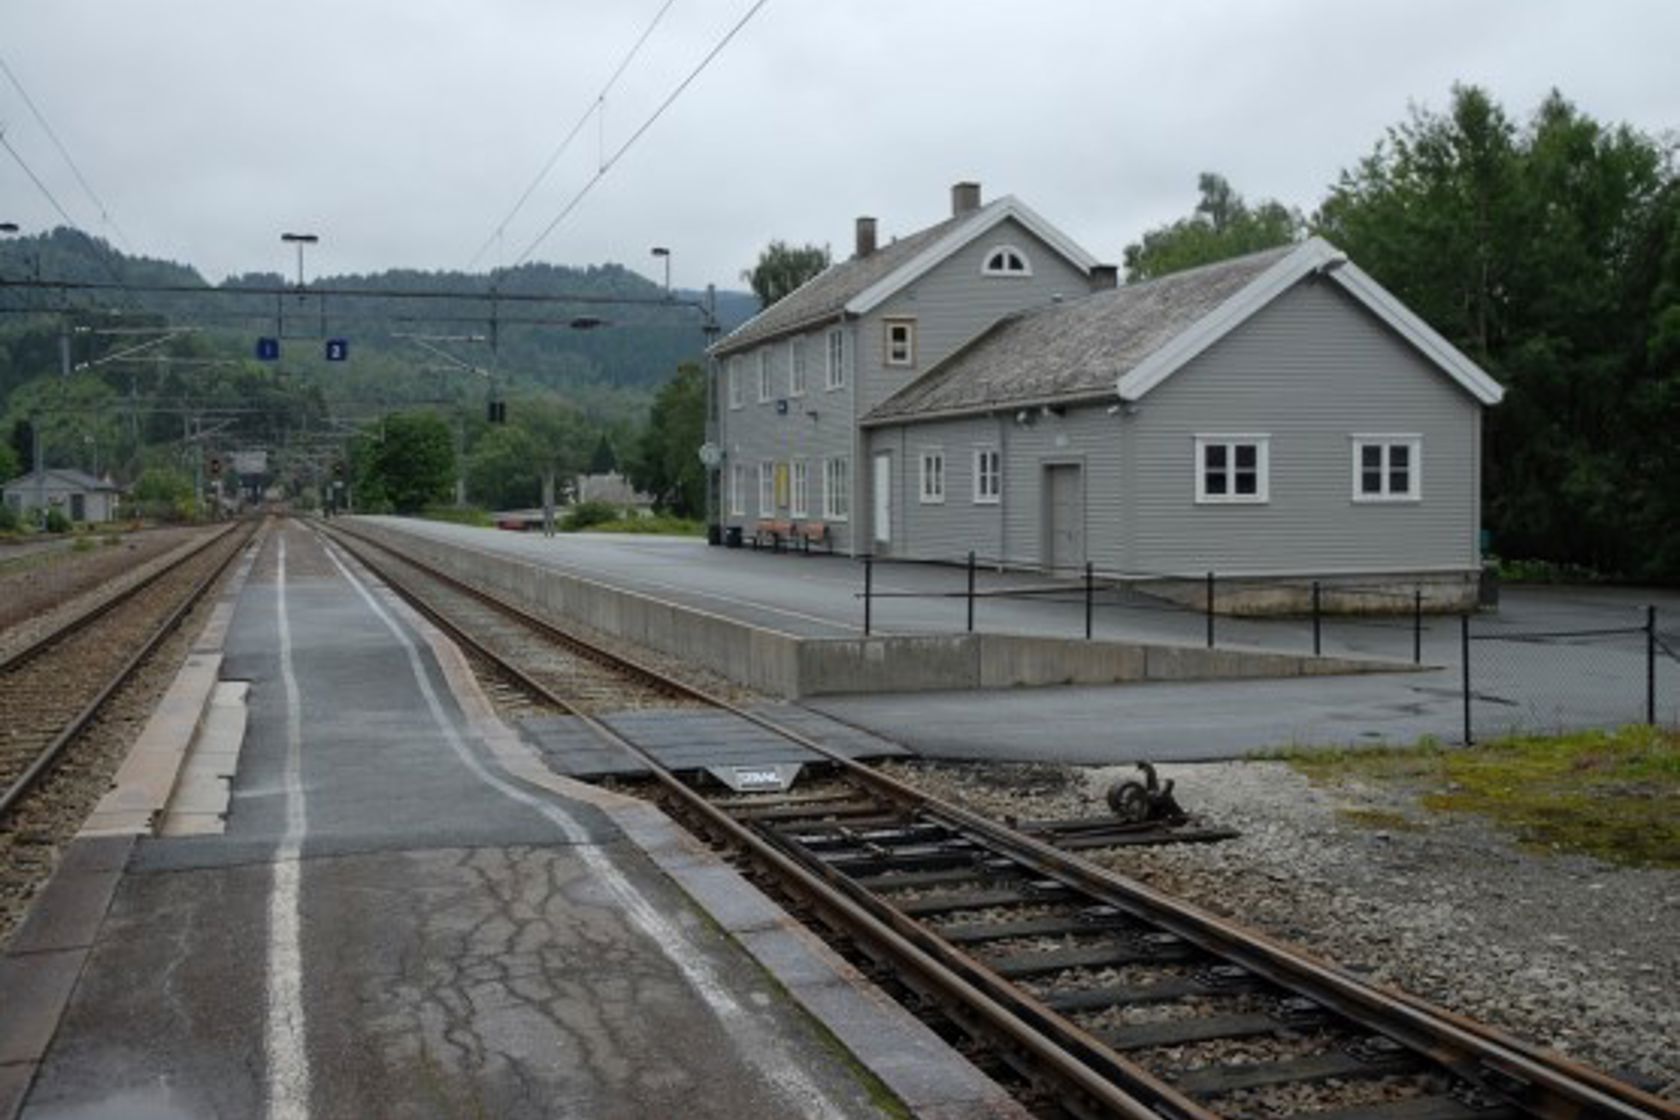 Exterior view of Sira station